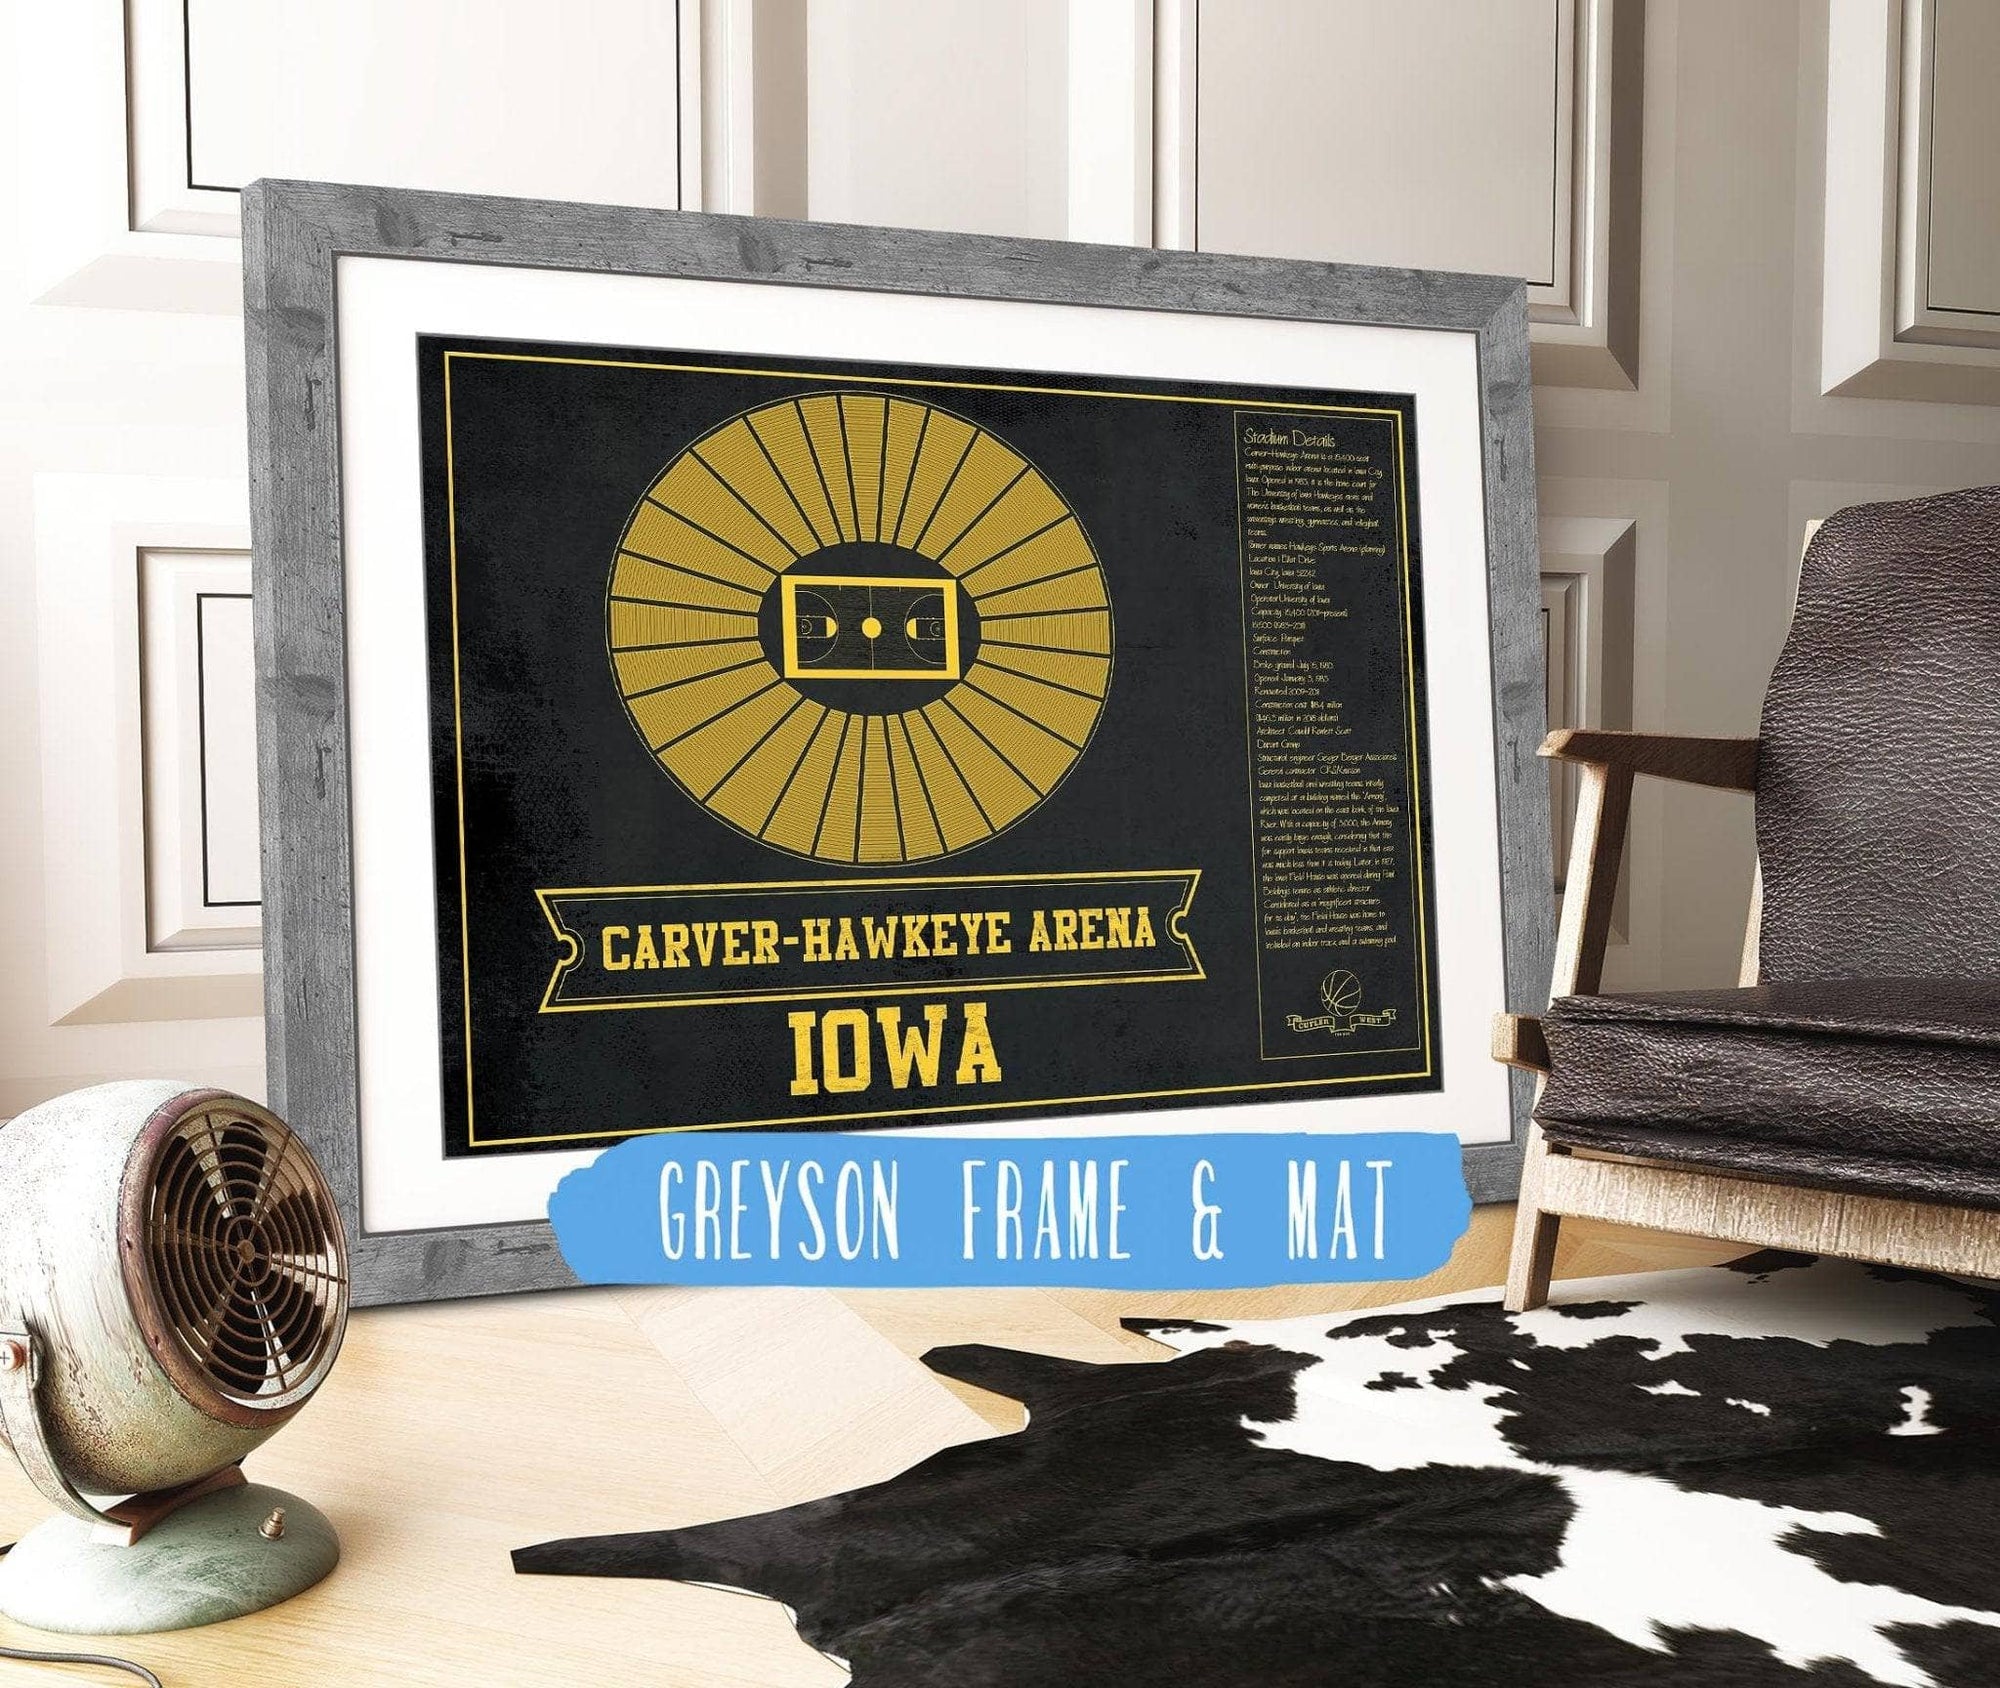 Cutler West Basketball Collection 14" x 11" / Greyson Frame & Mat Carver–Hawkeye Arena Iowa Men's And Women's Basketball Team Vintage Print 933350234_83500